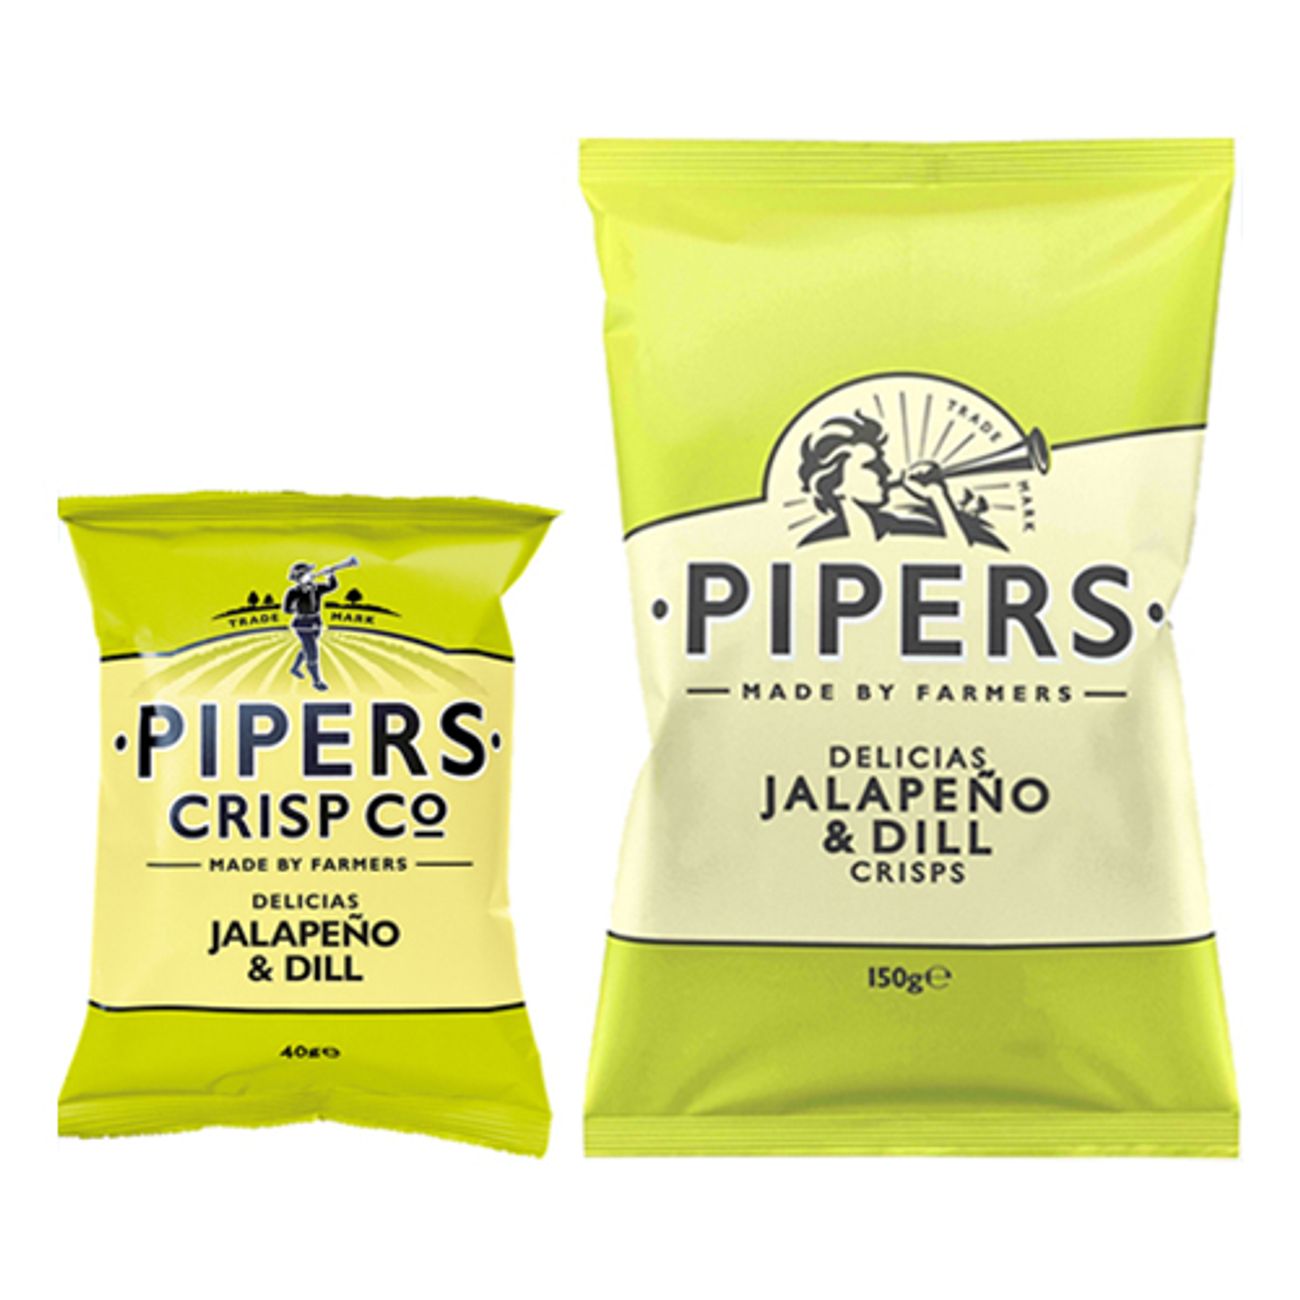 pipers-jalapeno-dill-1